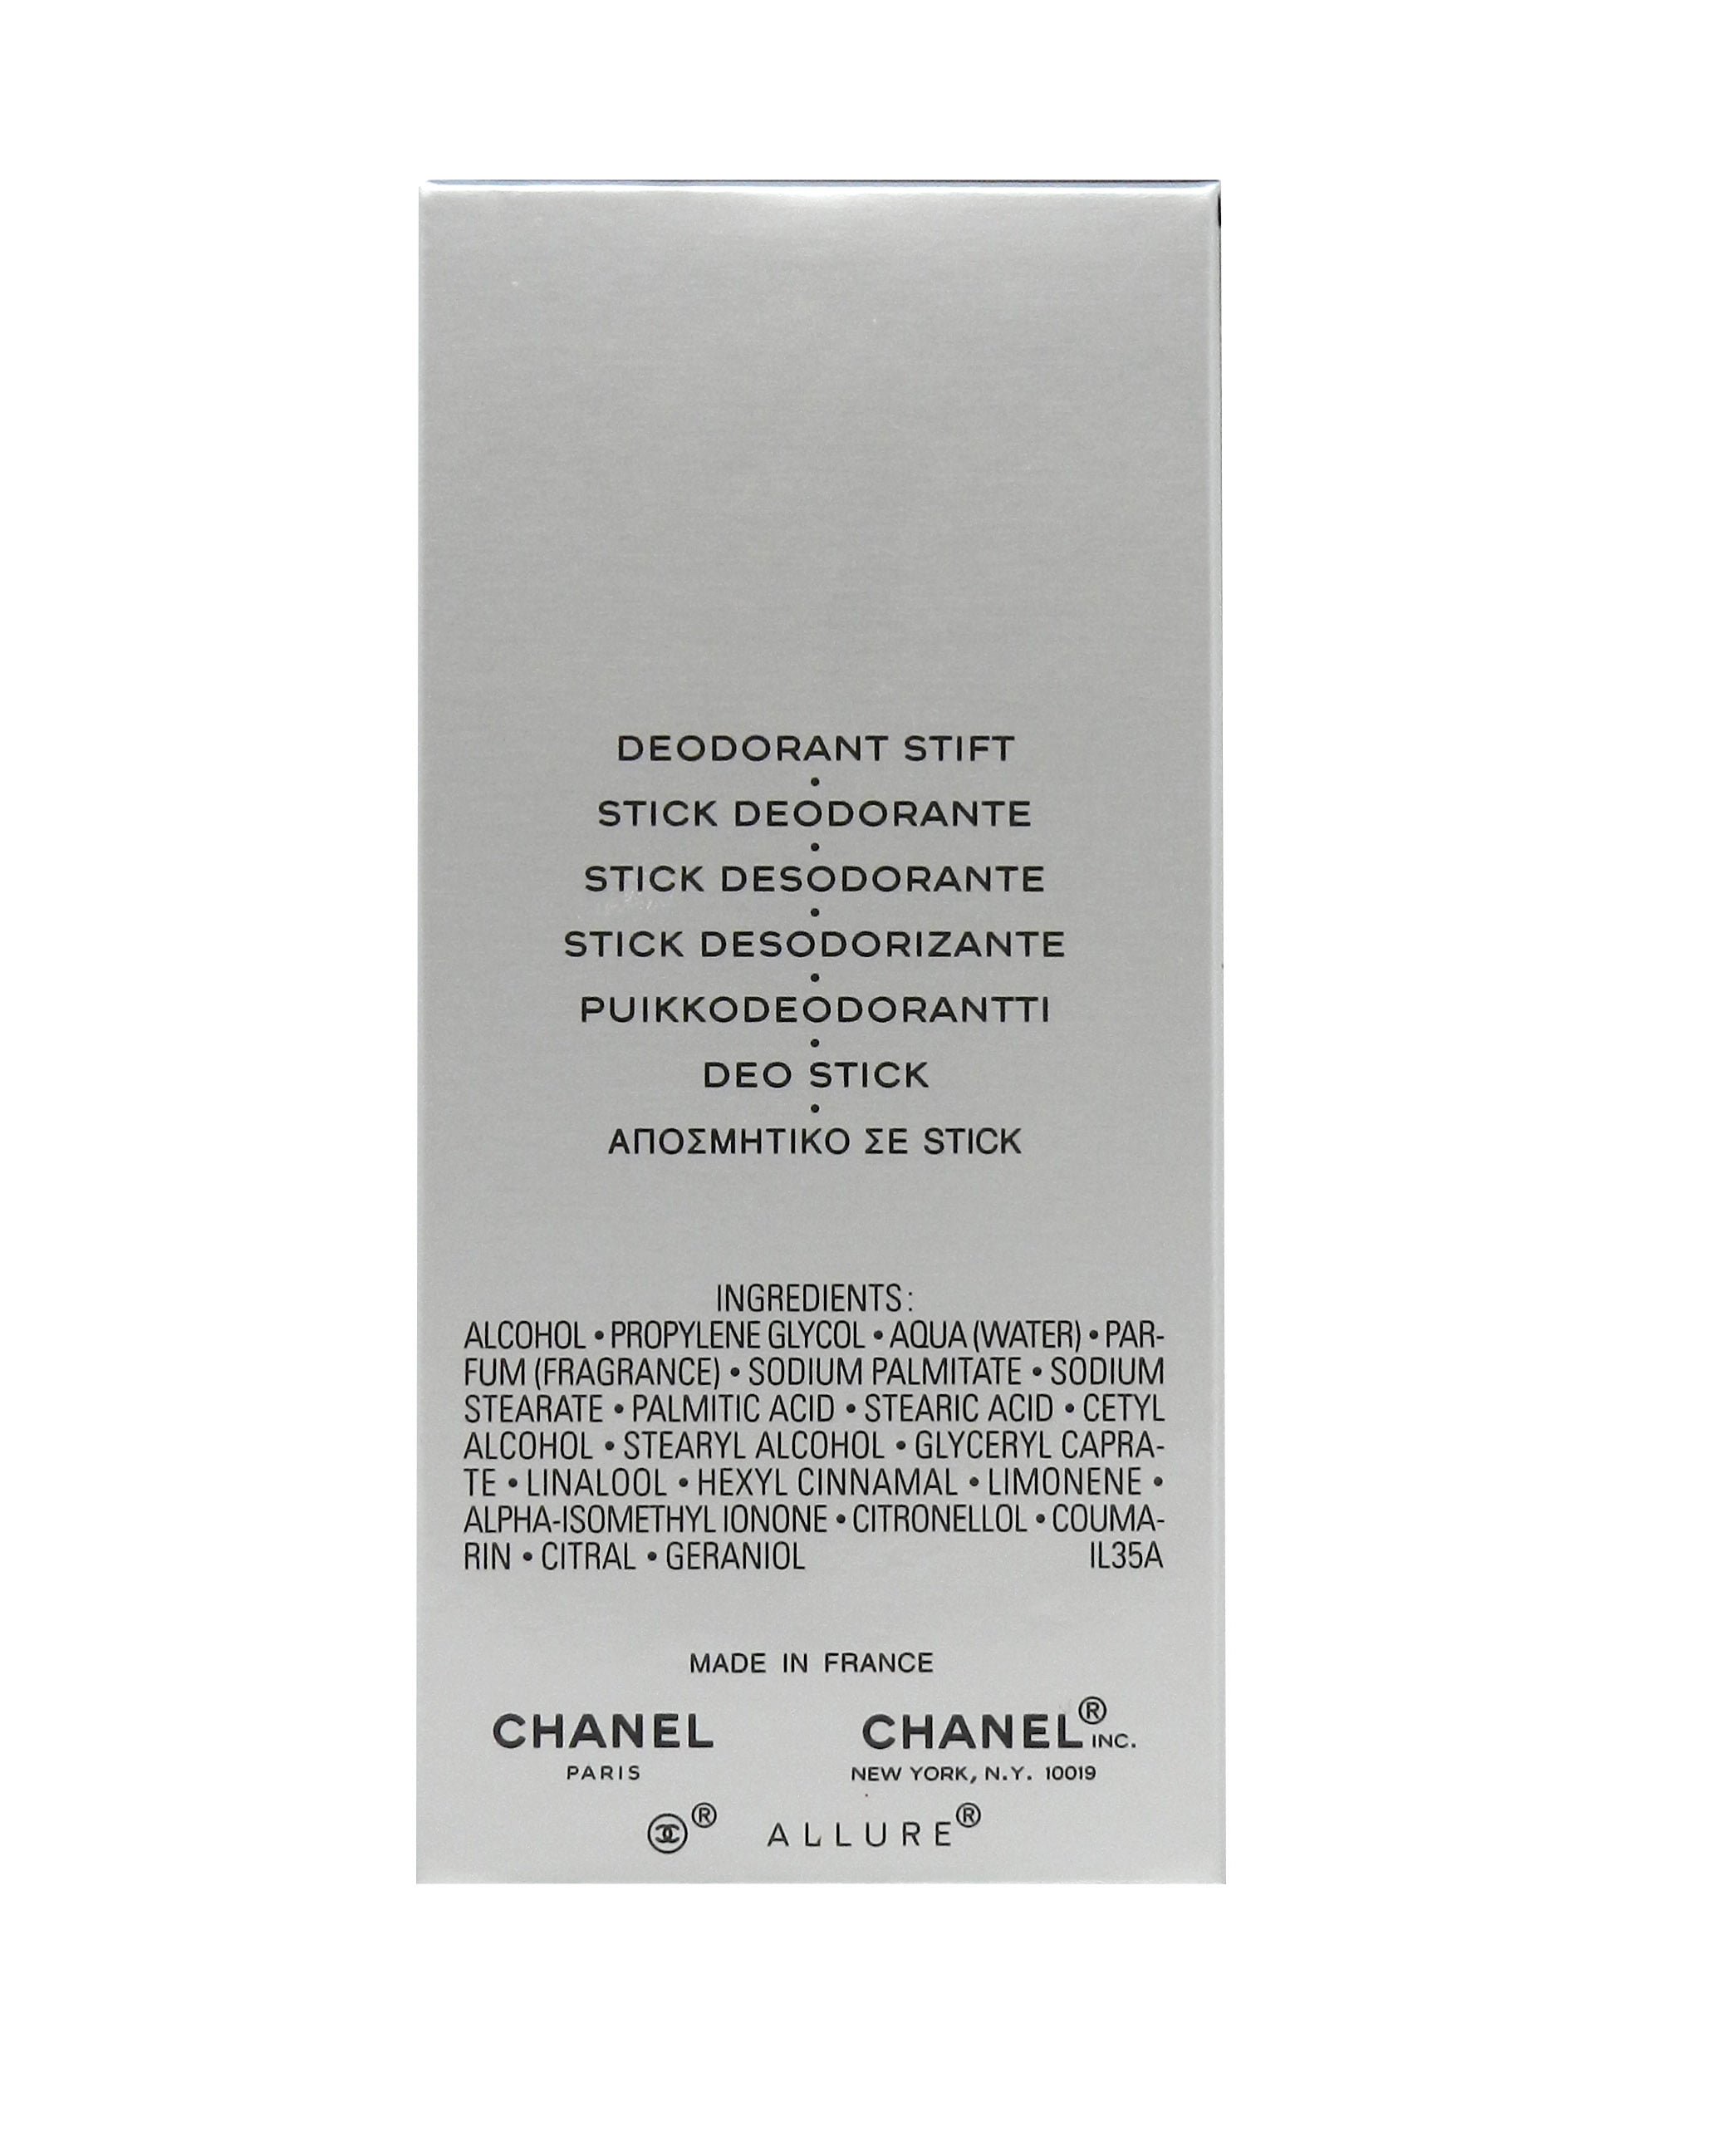 Buy Chanel Allure Homme Sport Deodorant Stick (75 ml) from £34.20 (Today) –  Best Black Friday Deals on